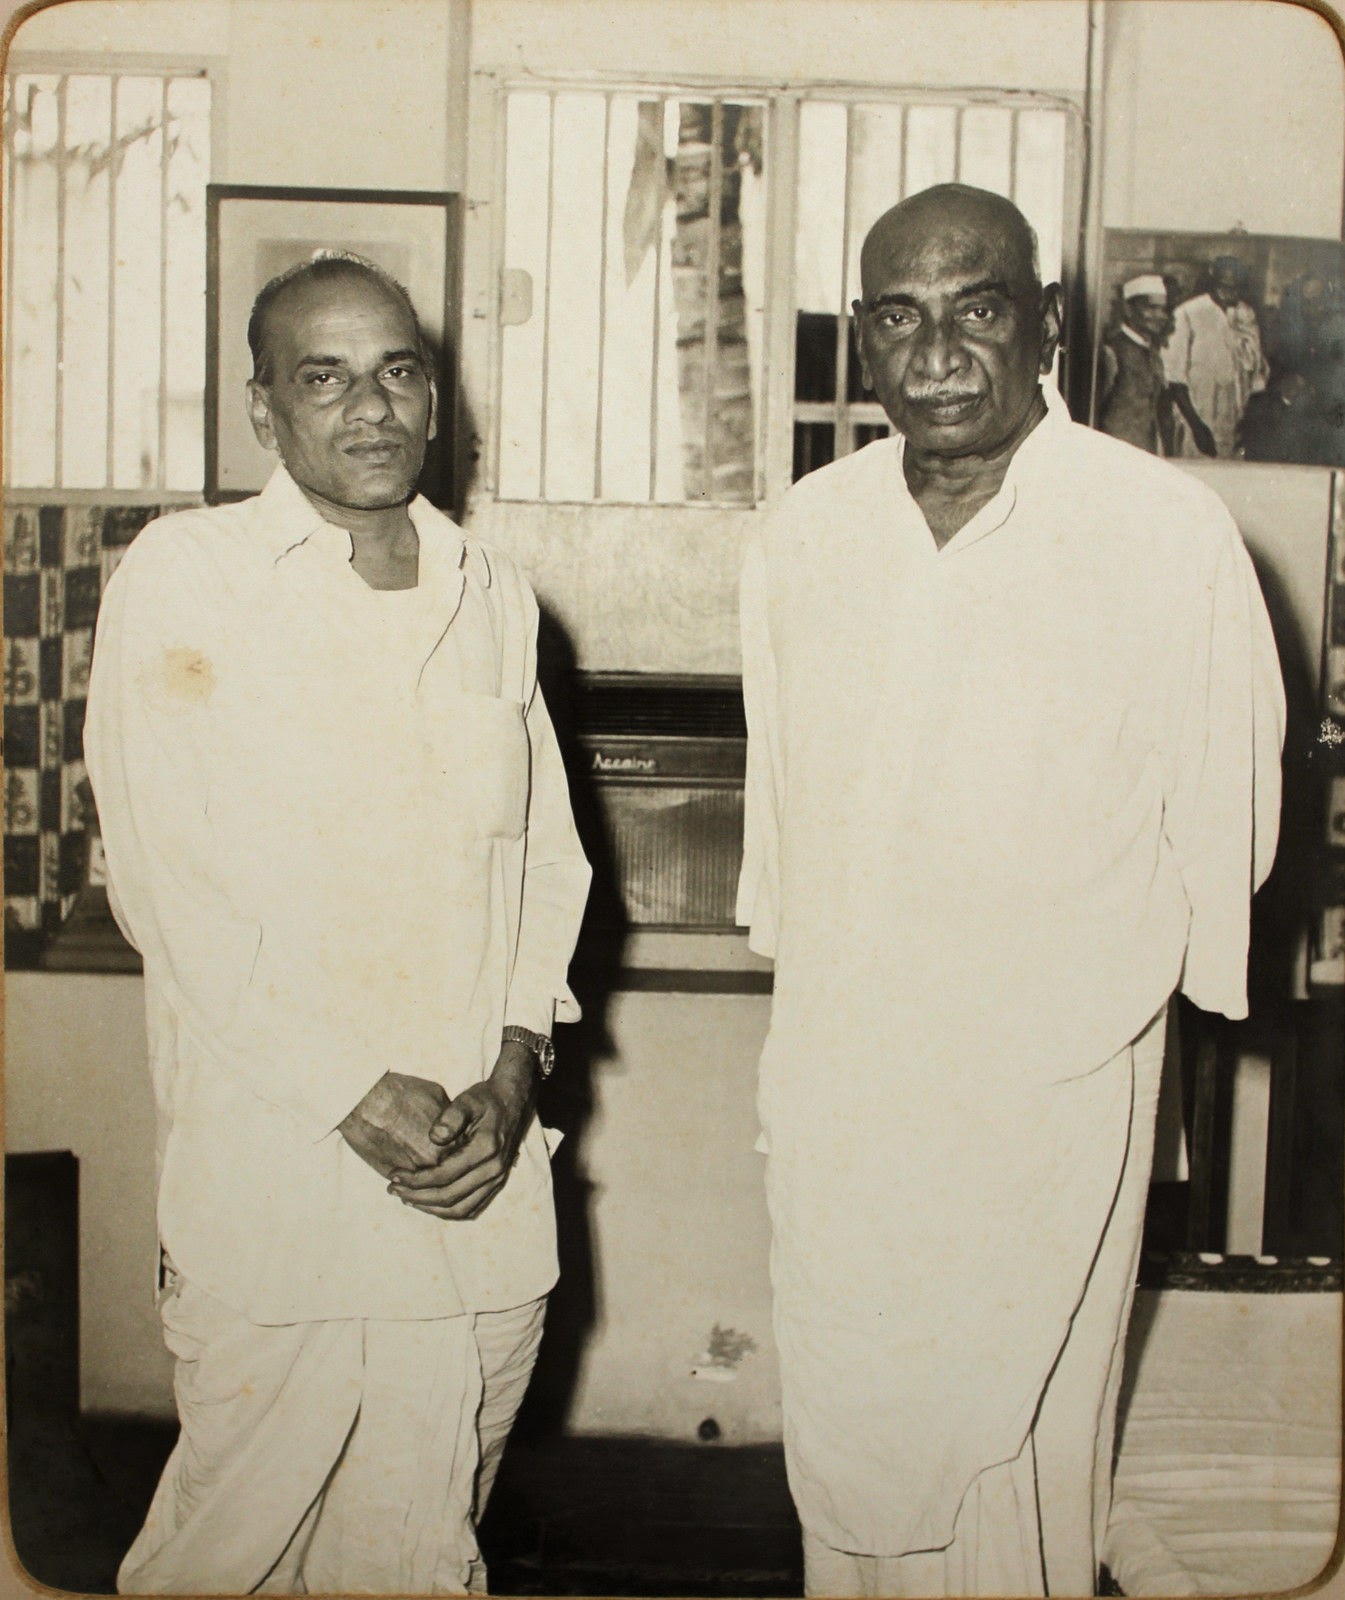 Indian National Congress Leader K. Kamraj (on the right) with a Friend 